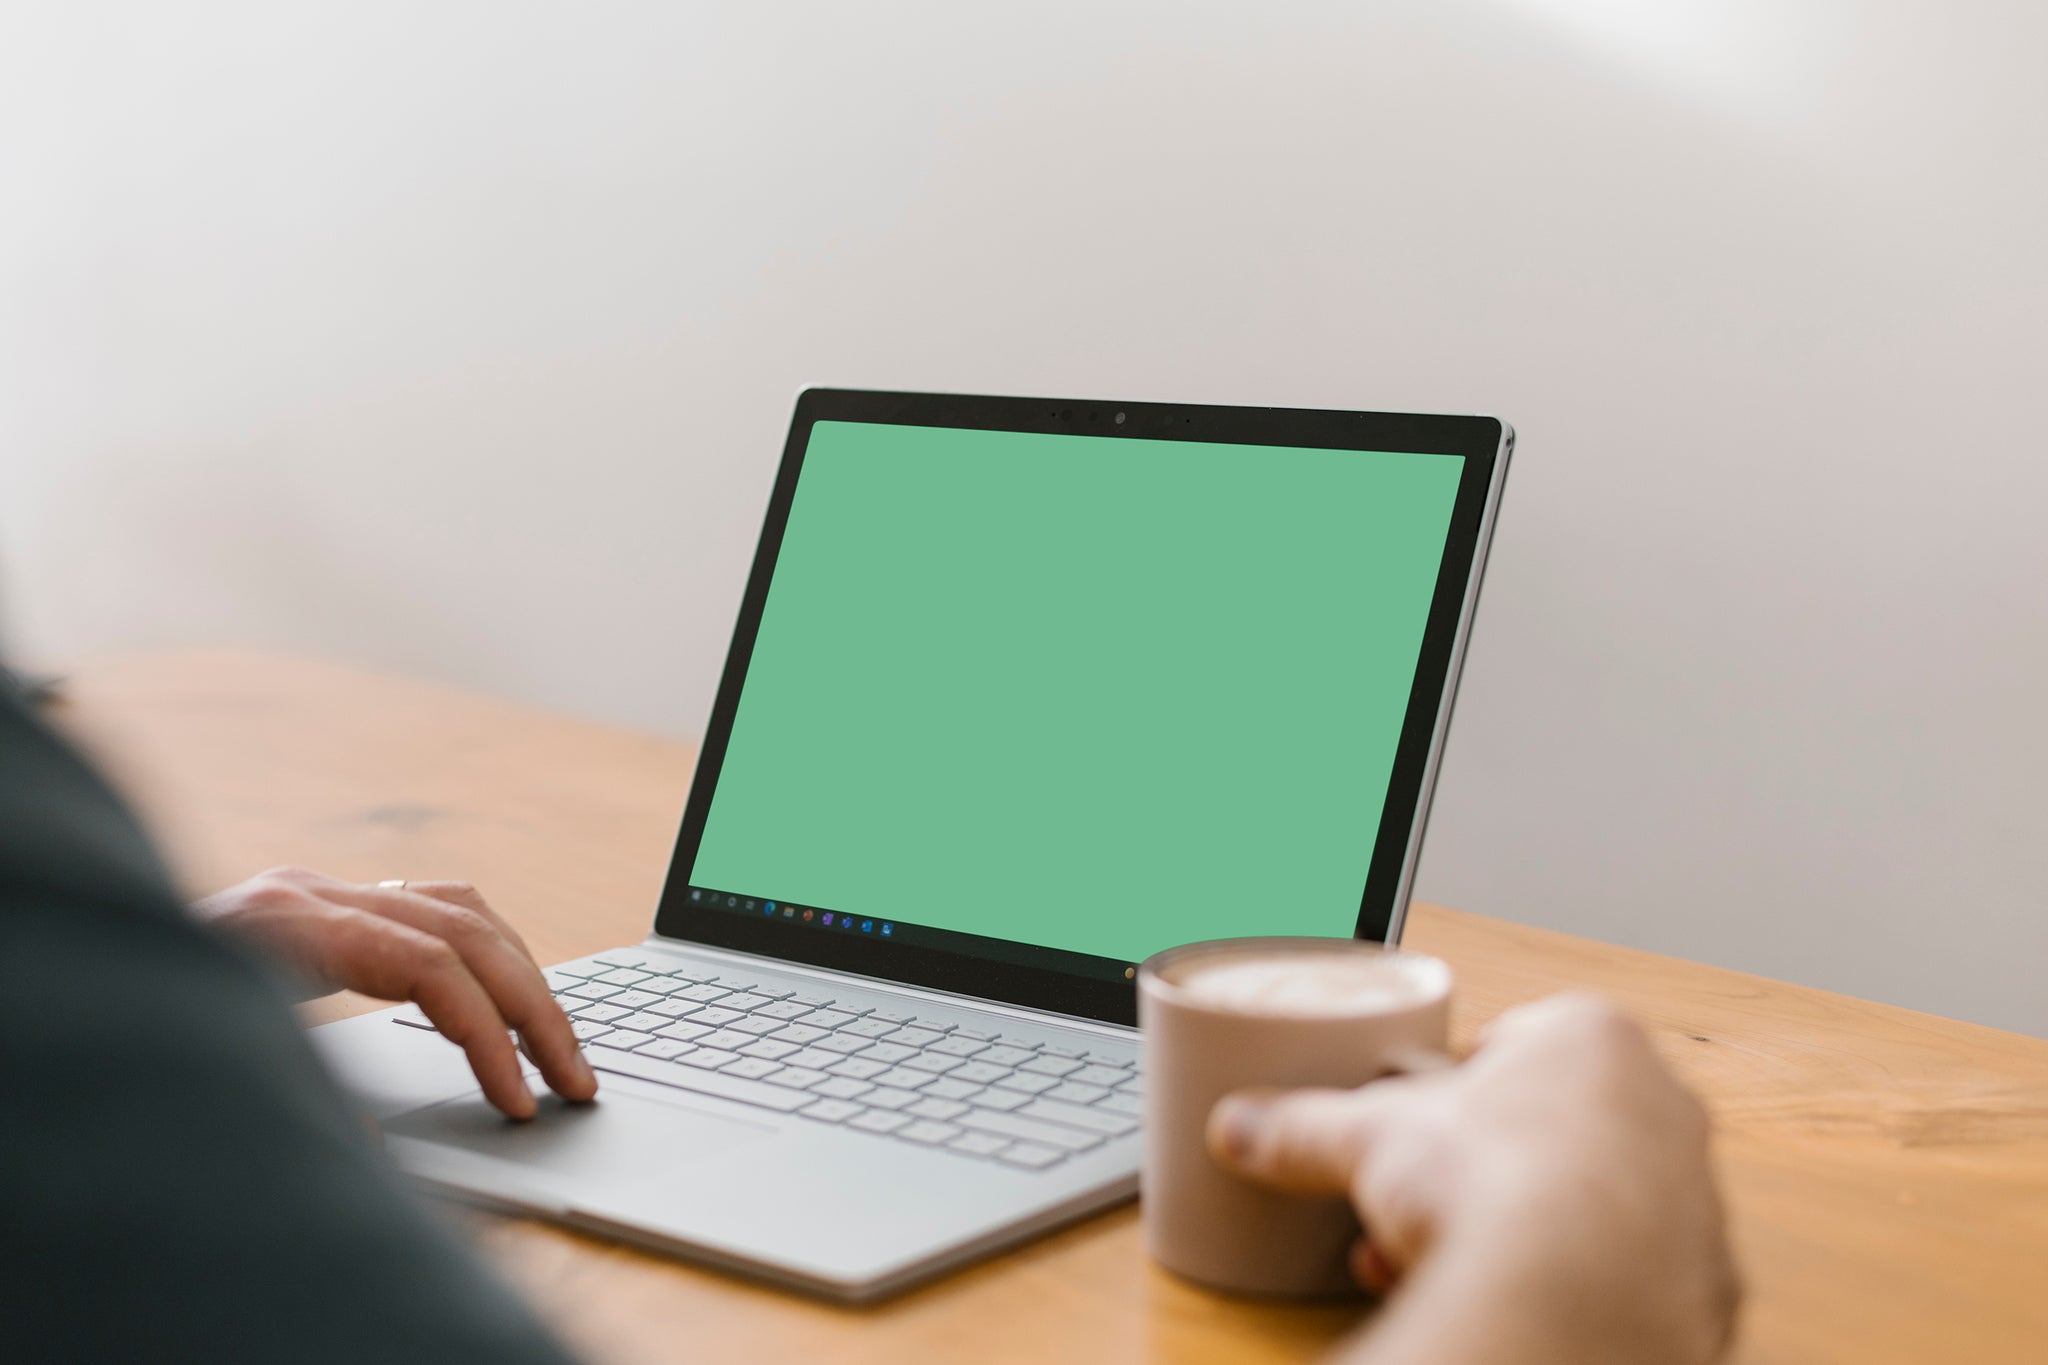 Landscape of an over-the-shoulder close-up of a person using a MacBook computer drinking a hot beverage. The monitor displays a plain green srcreen.